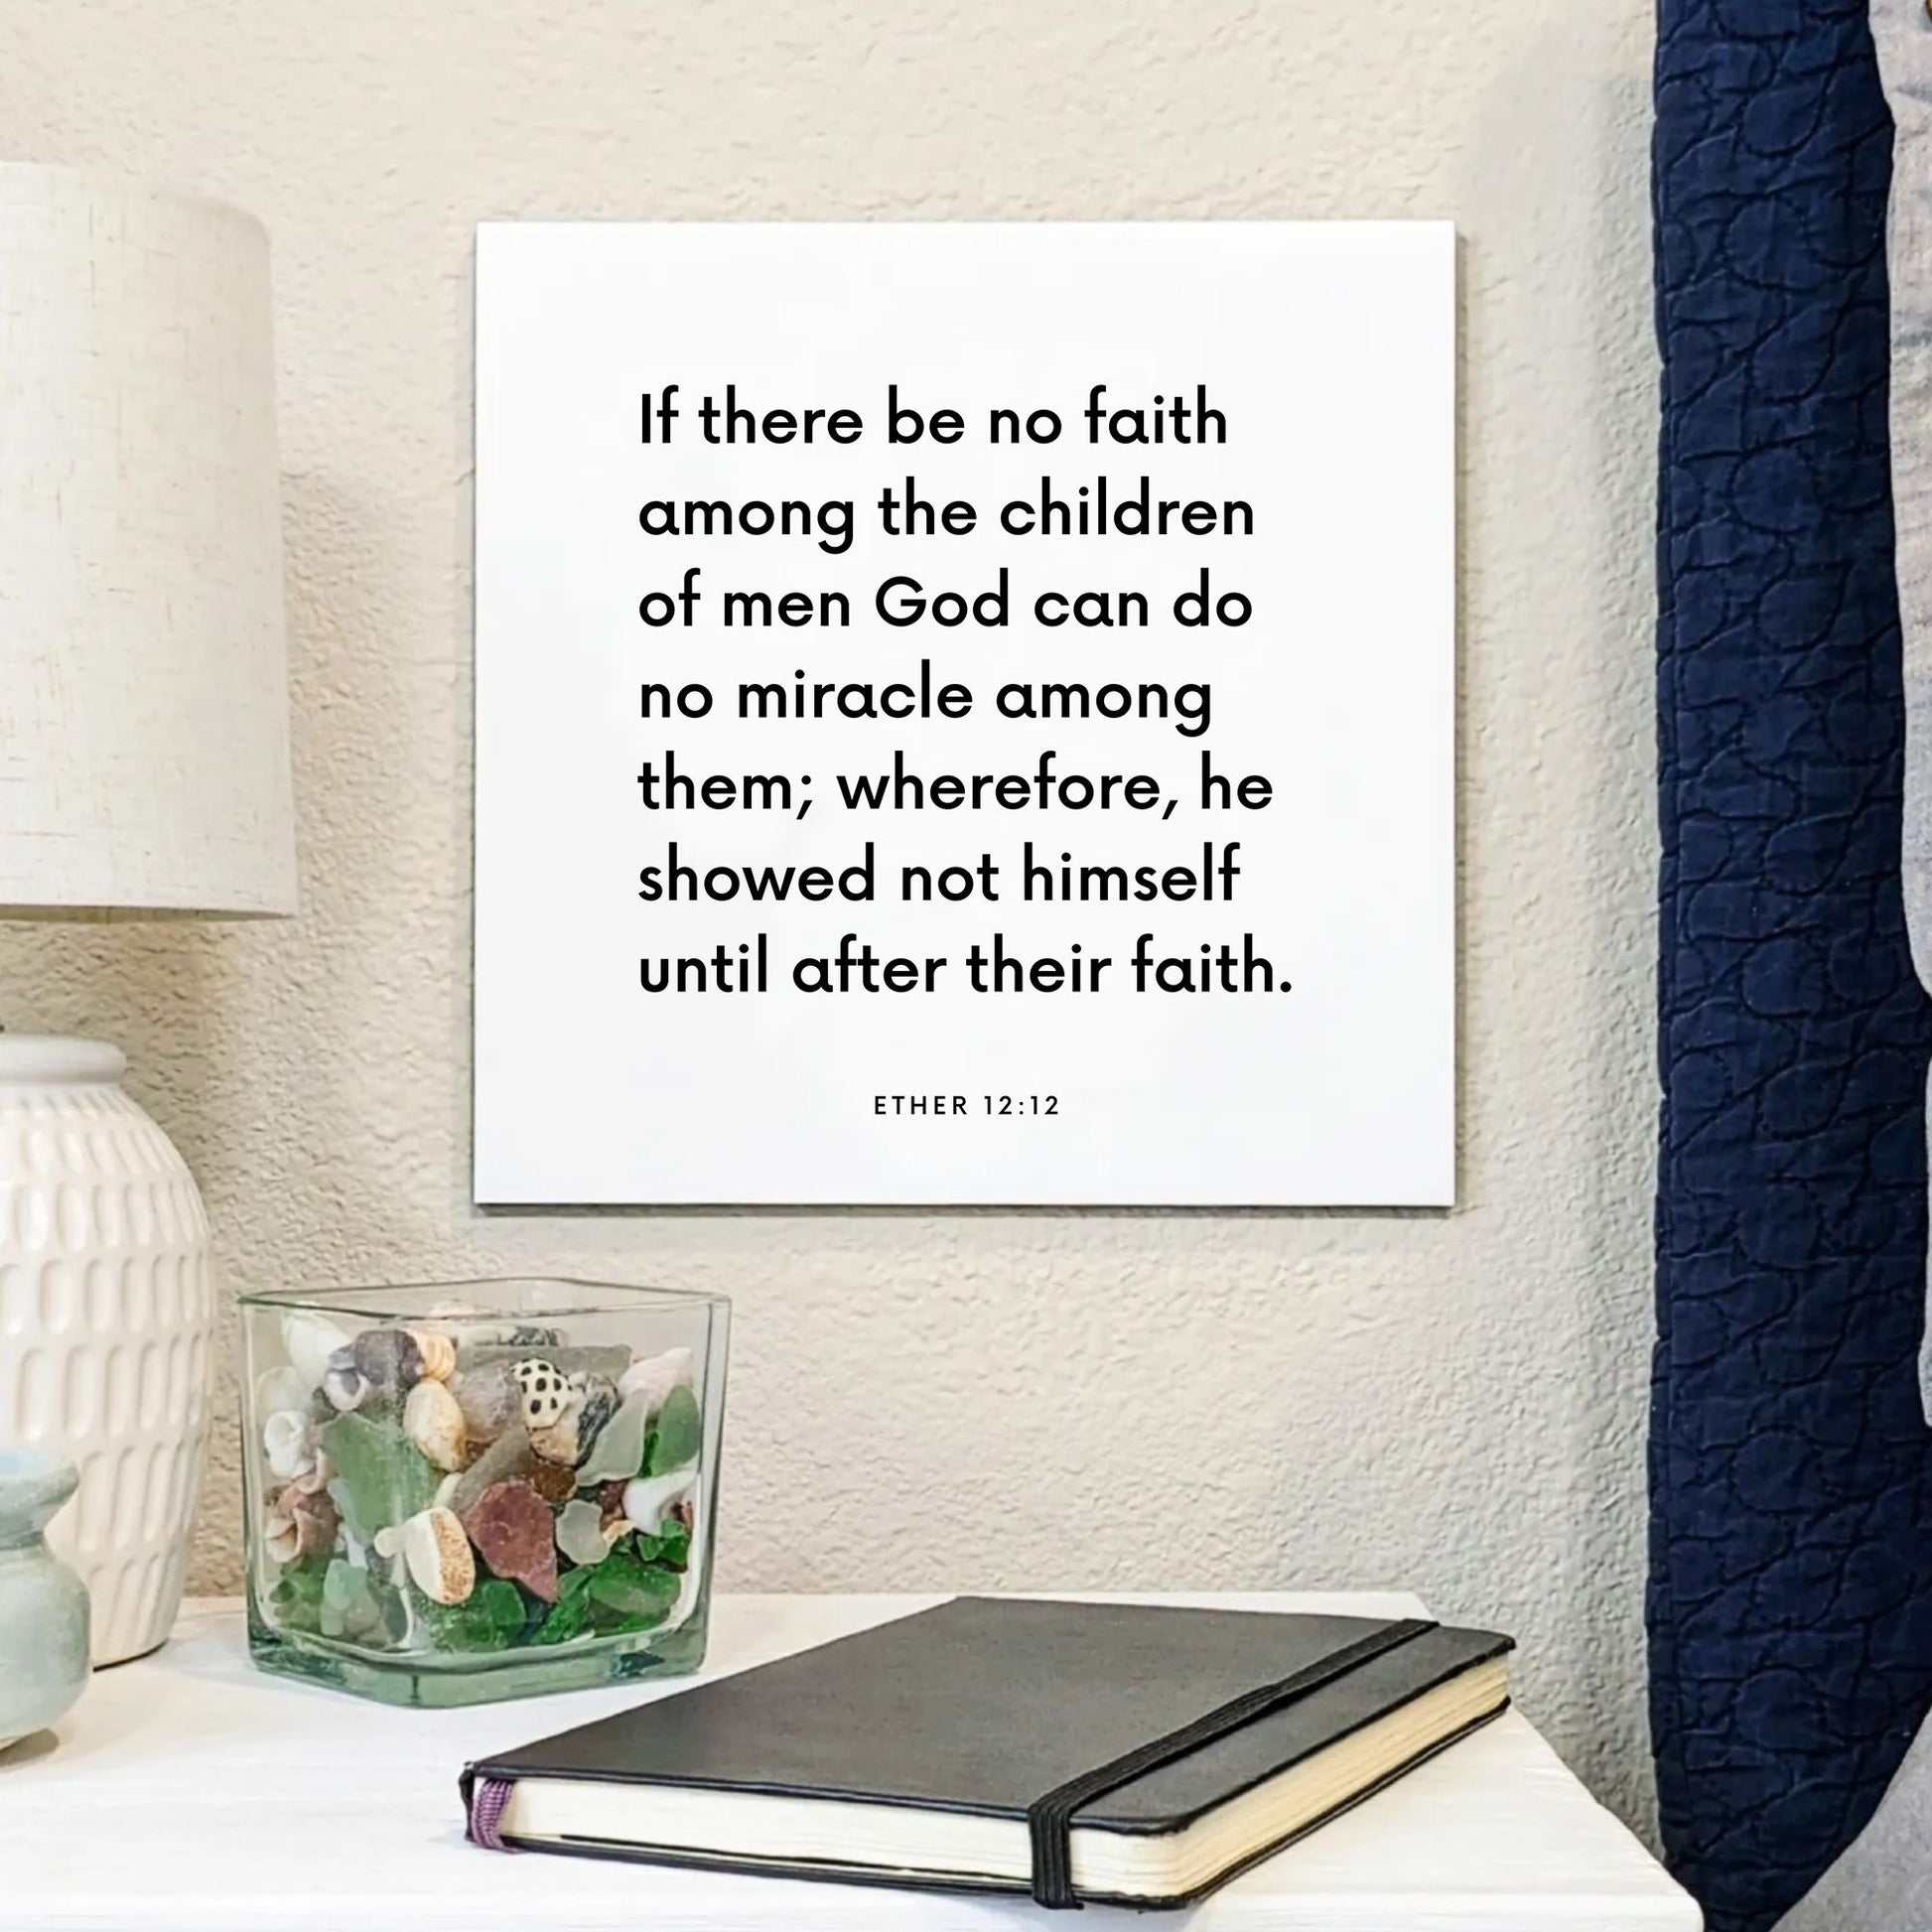 Bedside mouting of the scripture tile for Ether 12:12 - "If there be no faith, God can do no miracle"